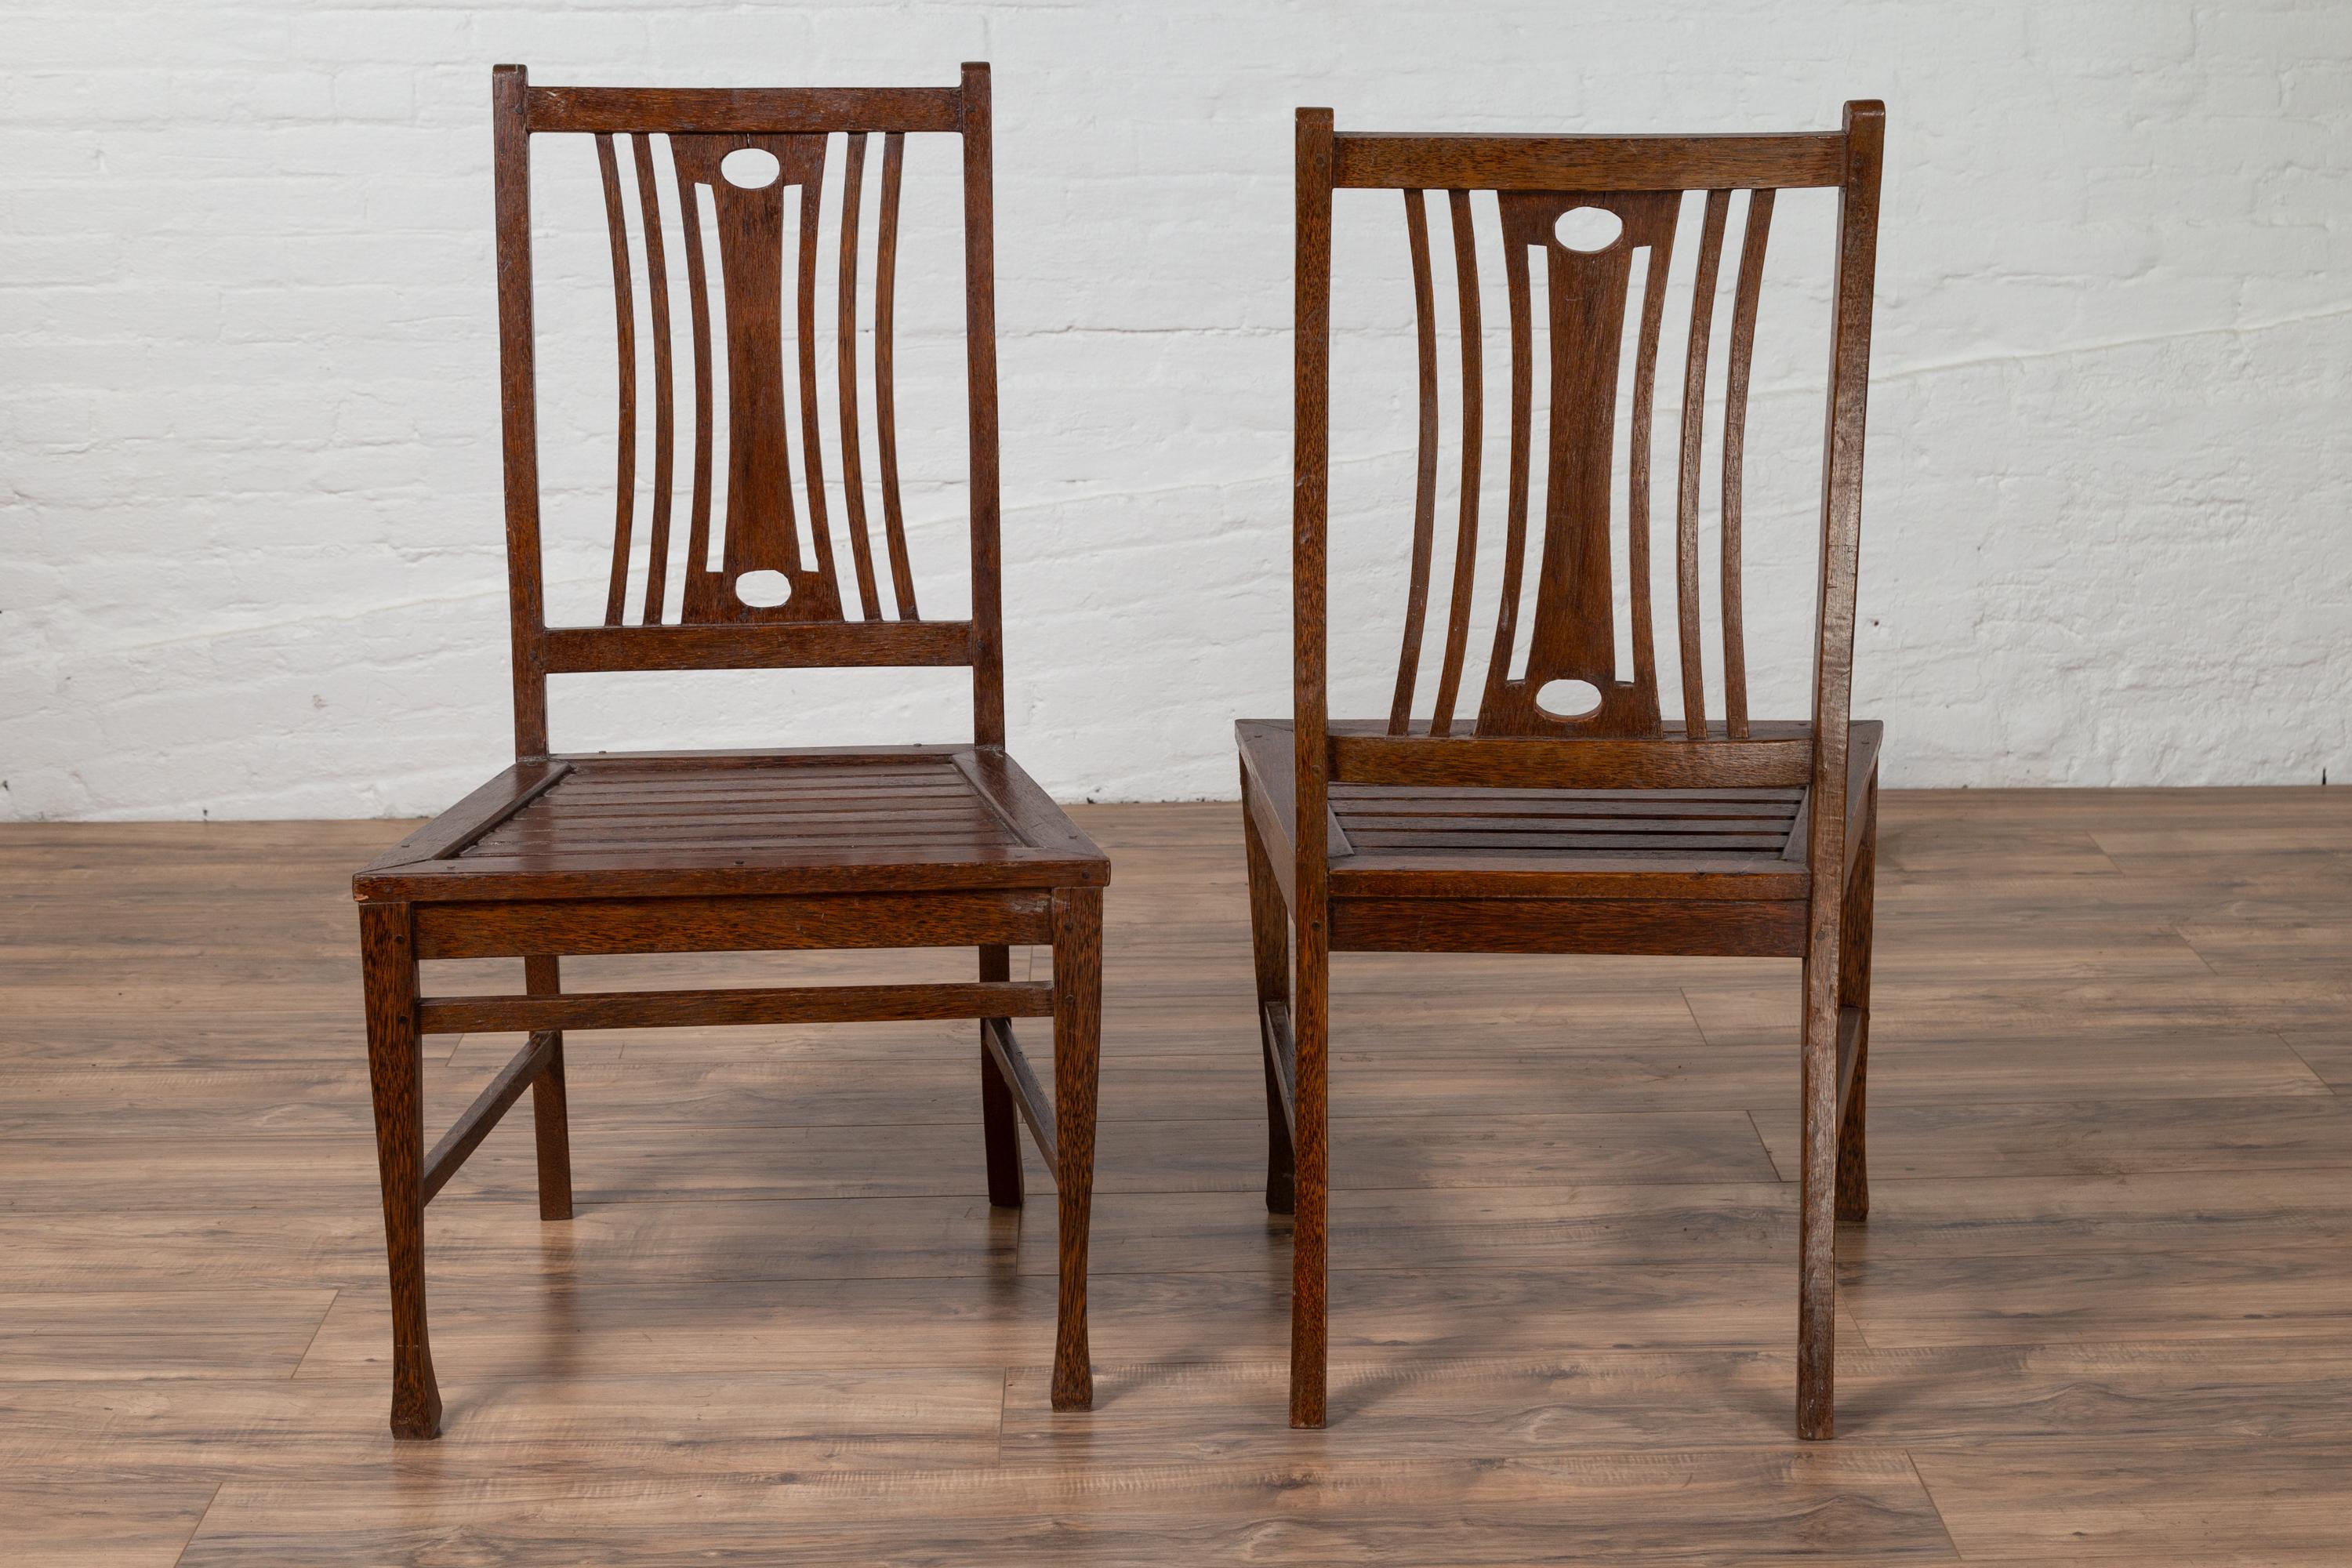 Pair of Midcentury Wooden Vintage Indonesian Side Chairs with Pierced Splats For Sale 4